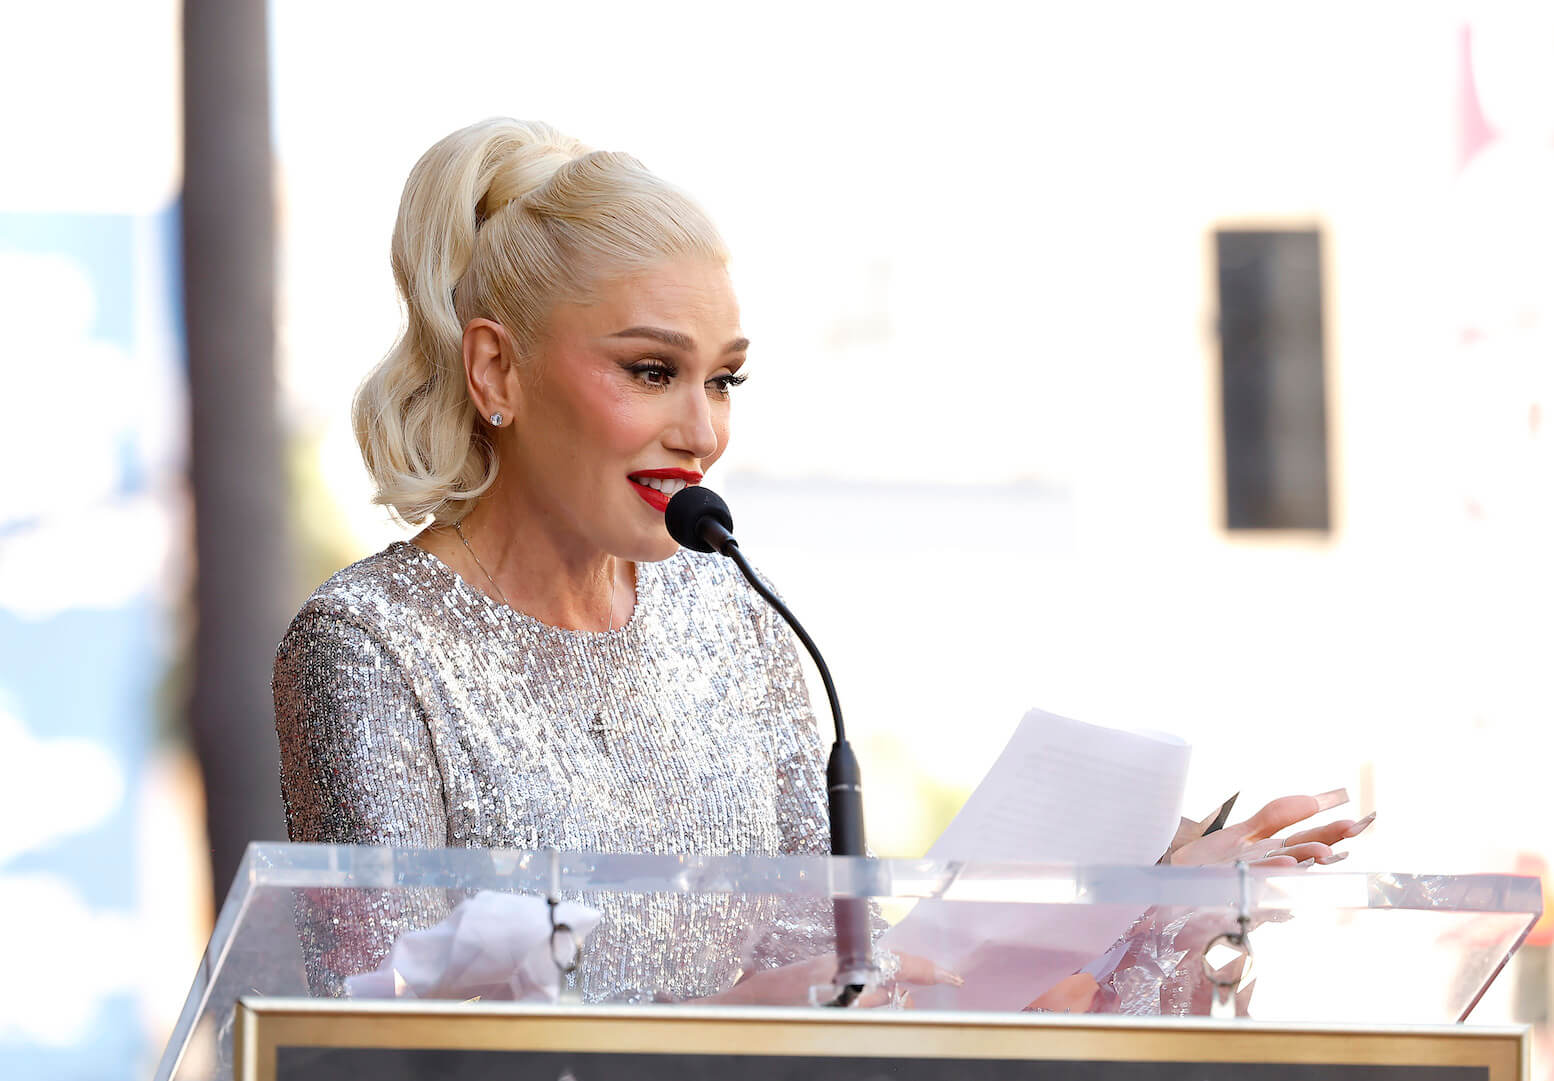 Gwen Stefani speaking into a microphone on a podium while wearing a sparkly silver dress on the Hollywood Walk of Fame